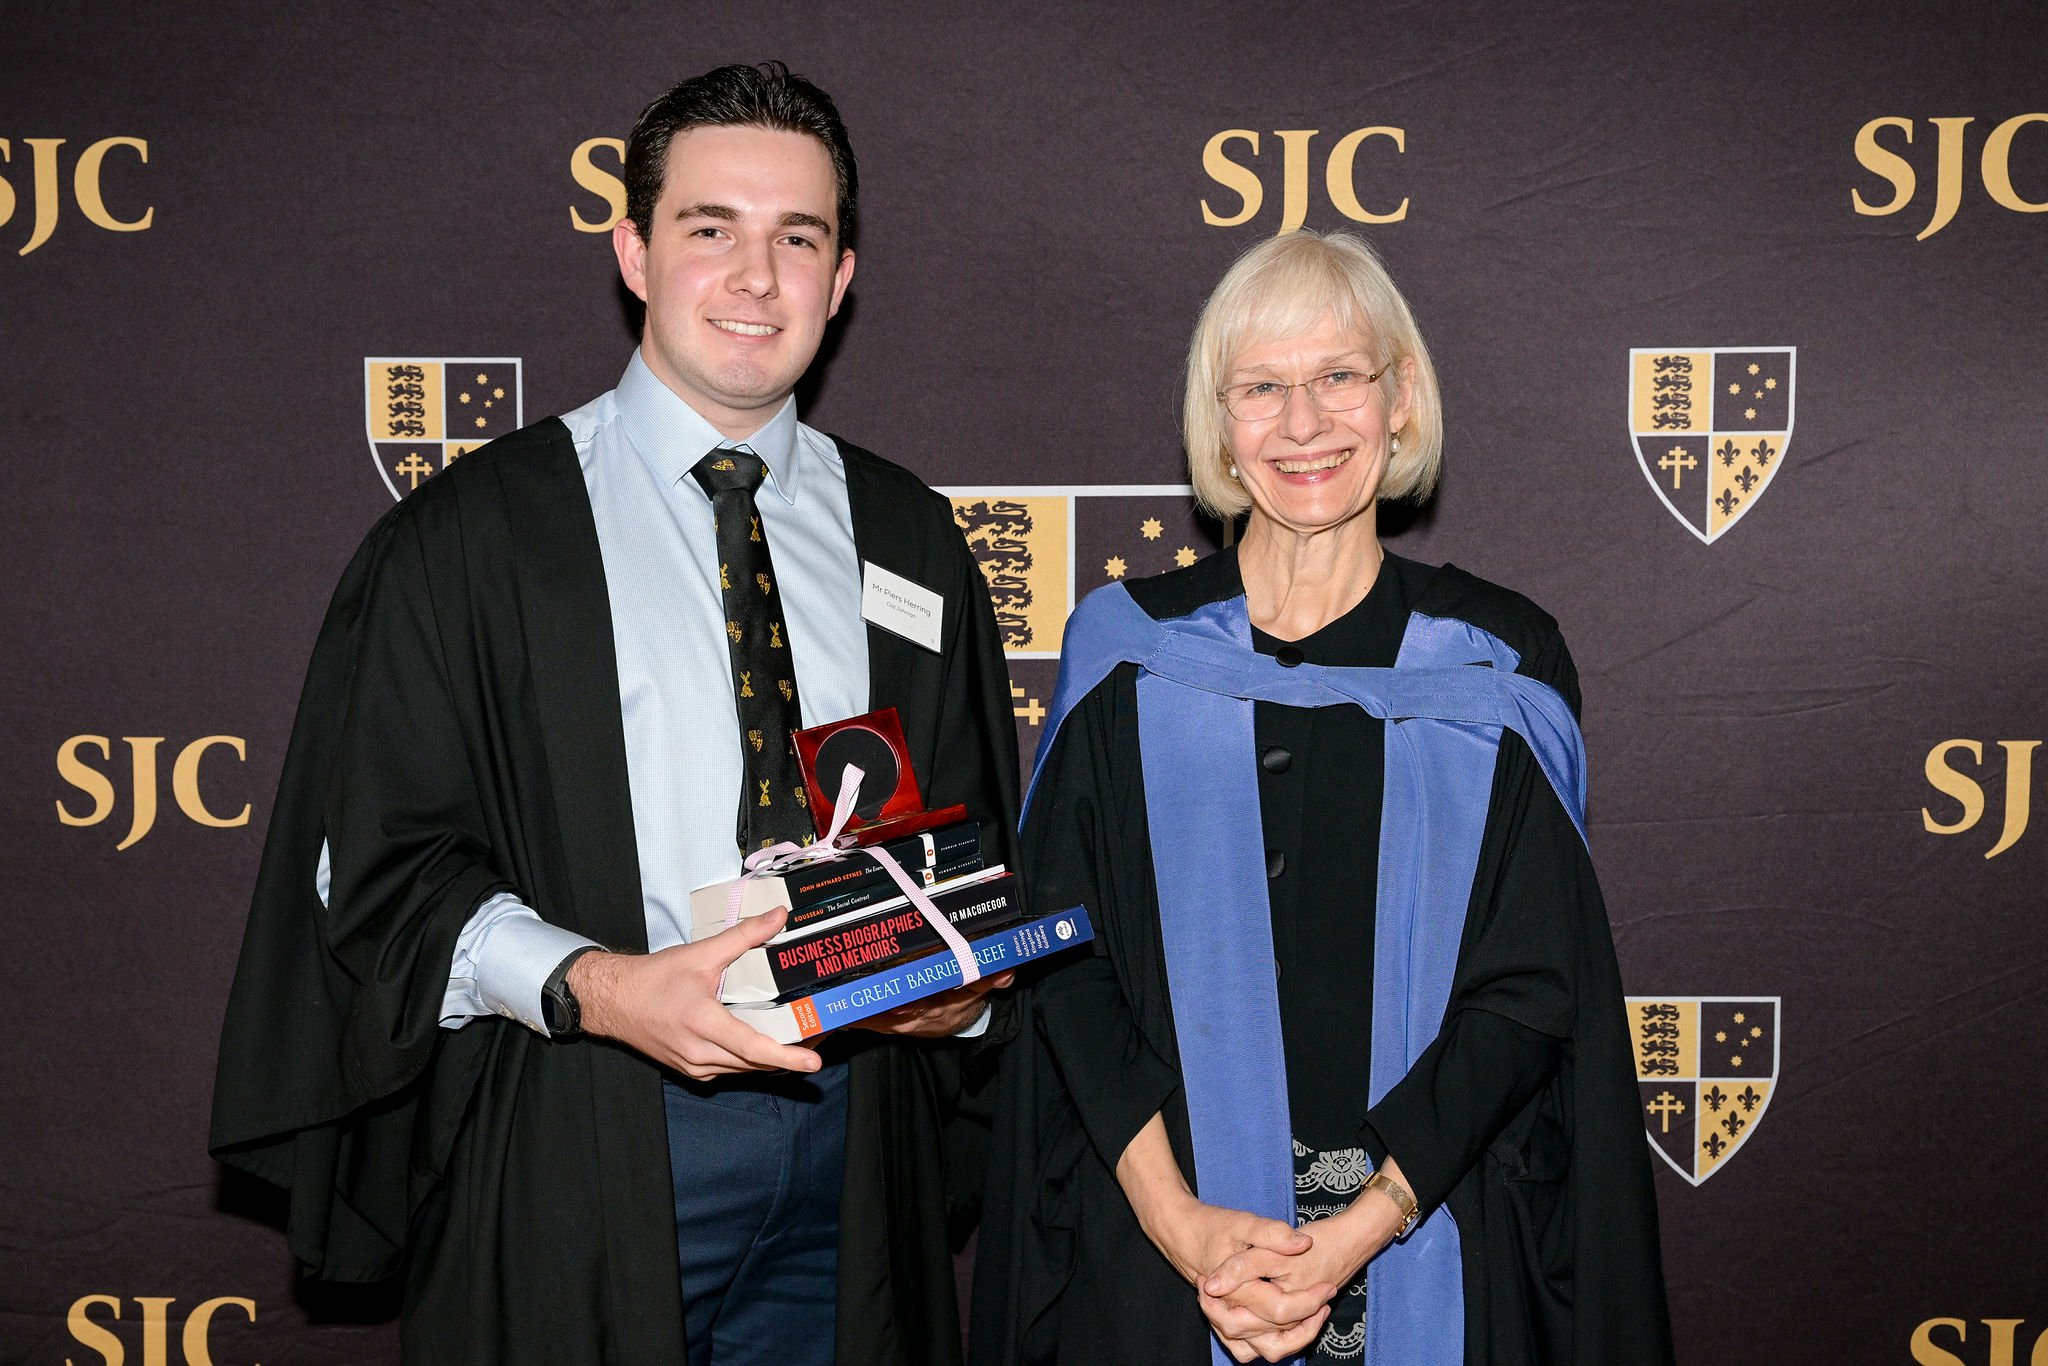 UQ Vice Chancellor and President, Deborah Terry AO and student, Piers Herring